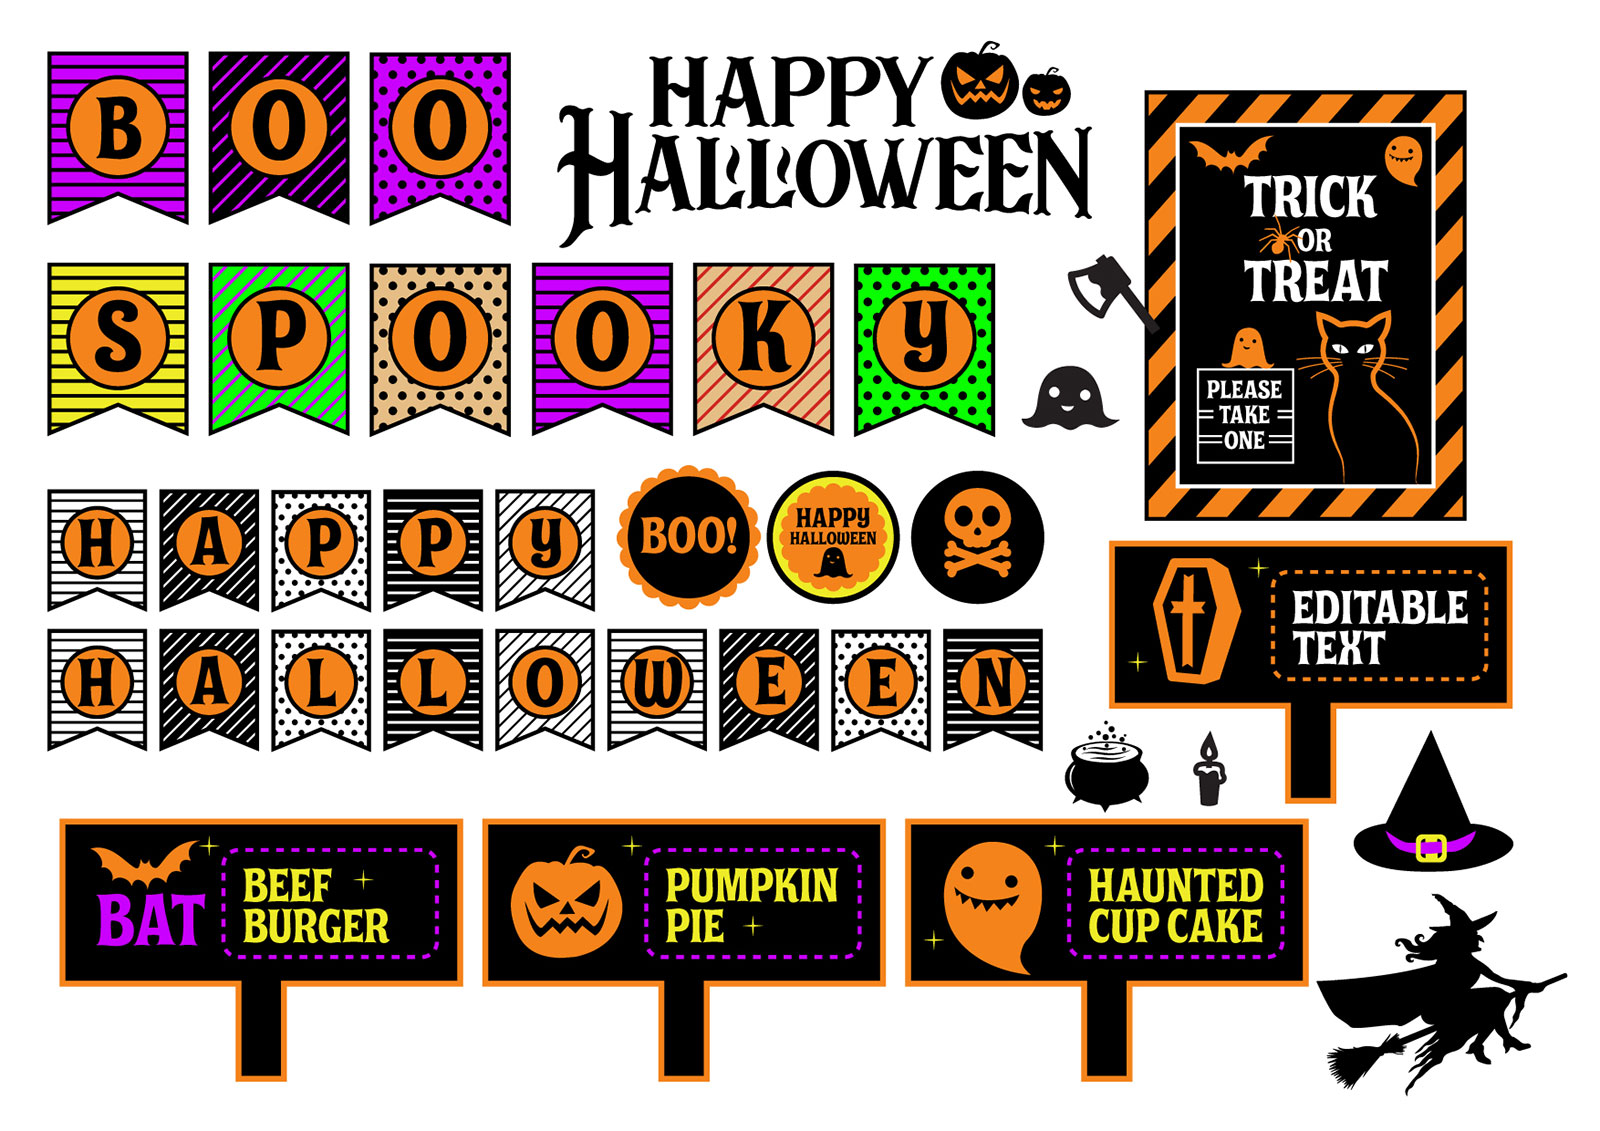 Free Easy To Print Cut Halloween Party Decorations 2019 Printable PDF Included Designbolts